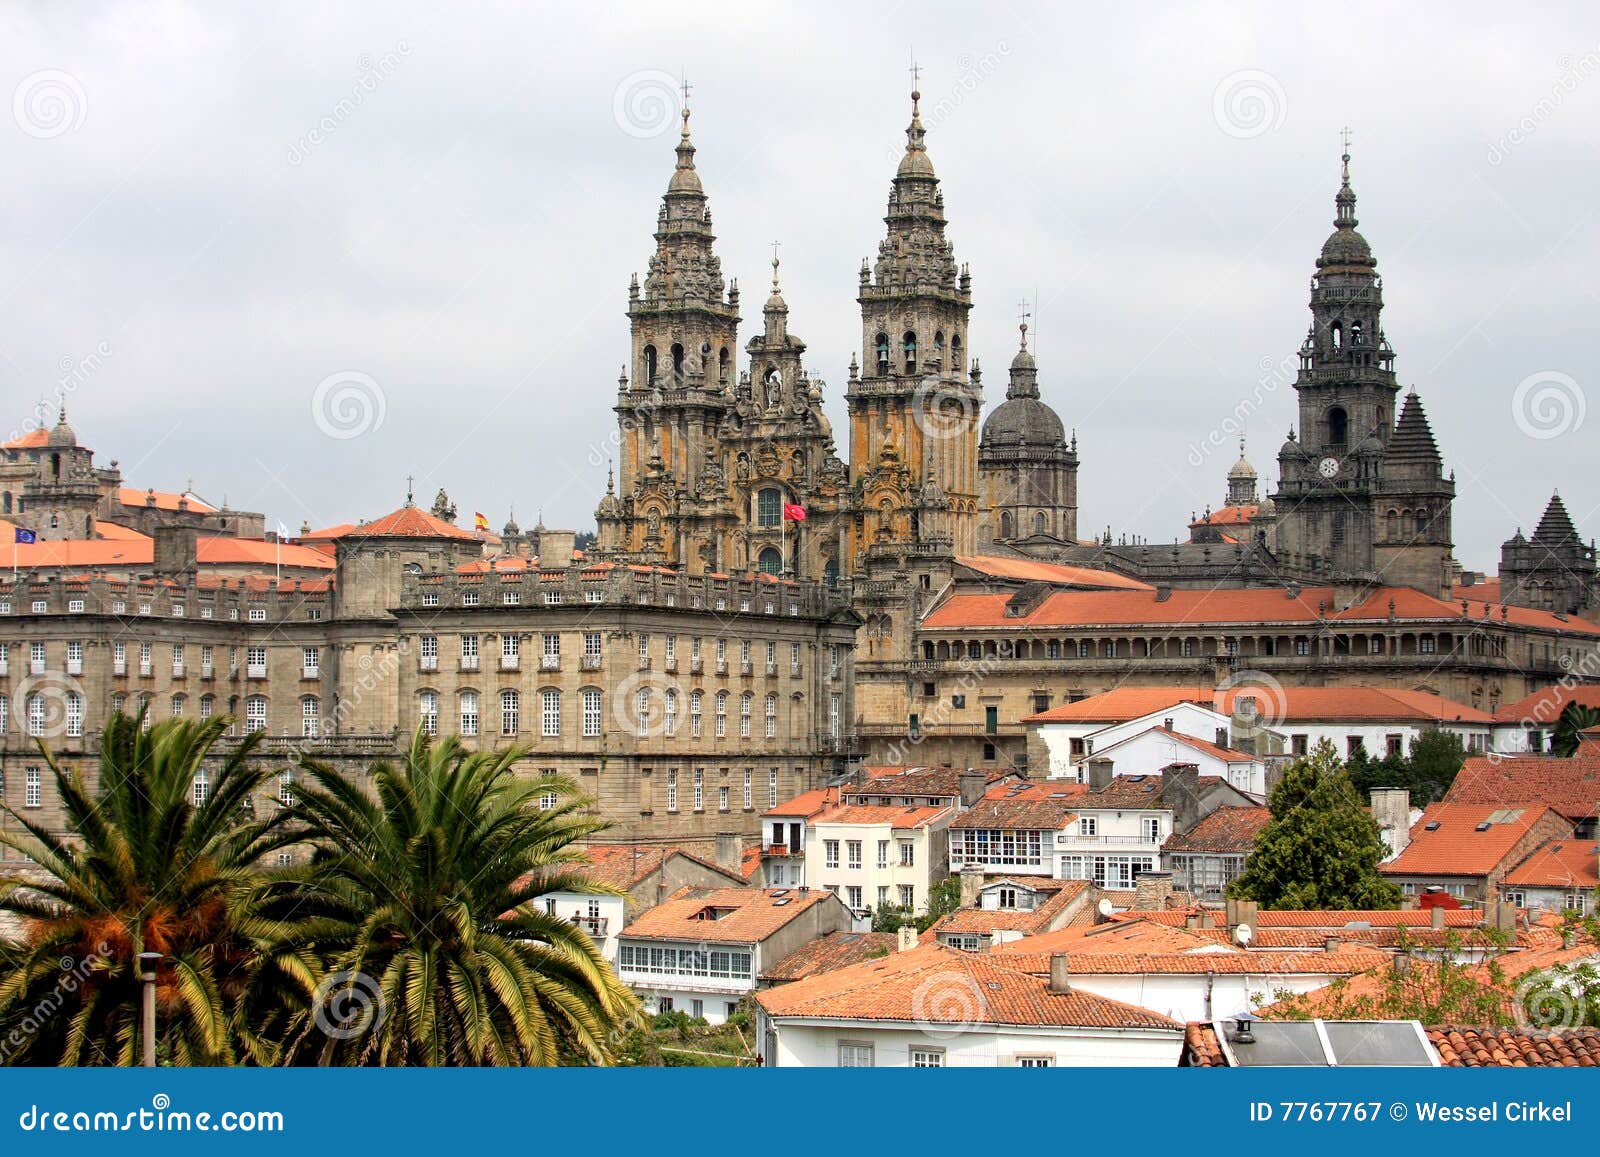 view upon santiago de compostela and her cathedral